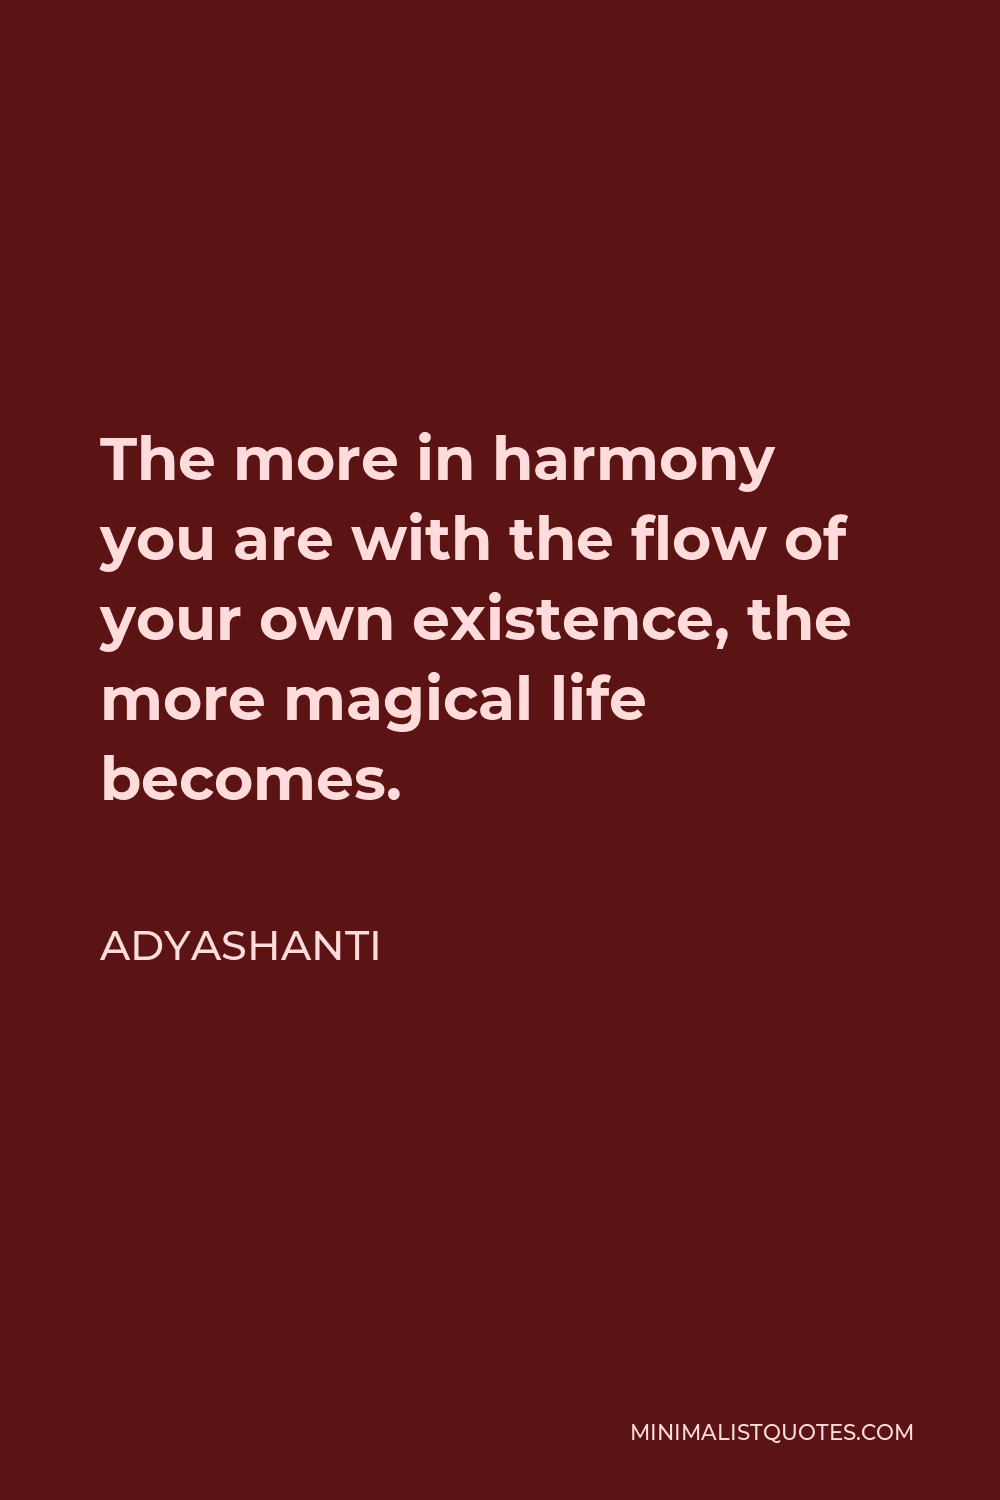 Adyashanti Quote - The more in harmony you are with the flow of your own existence, the more magical life becomes.